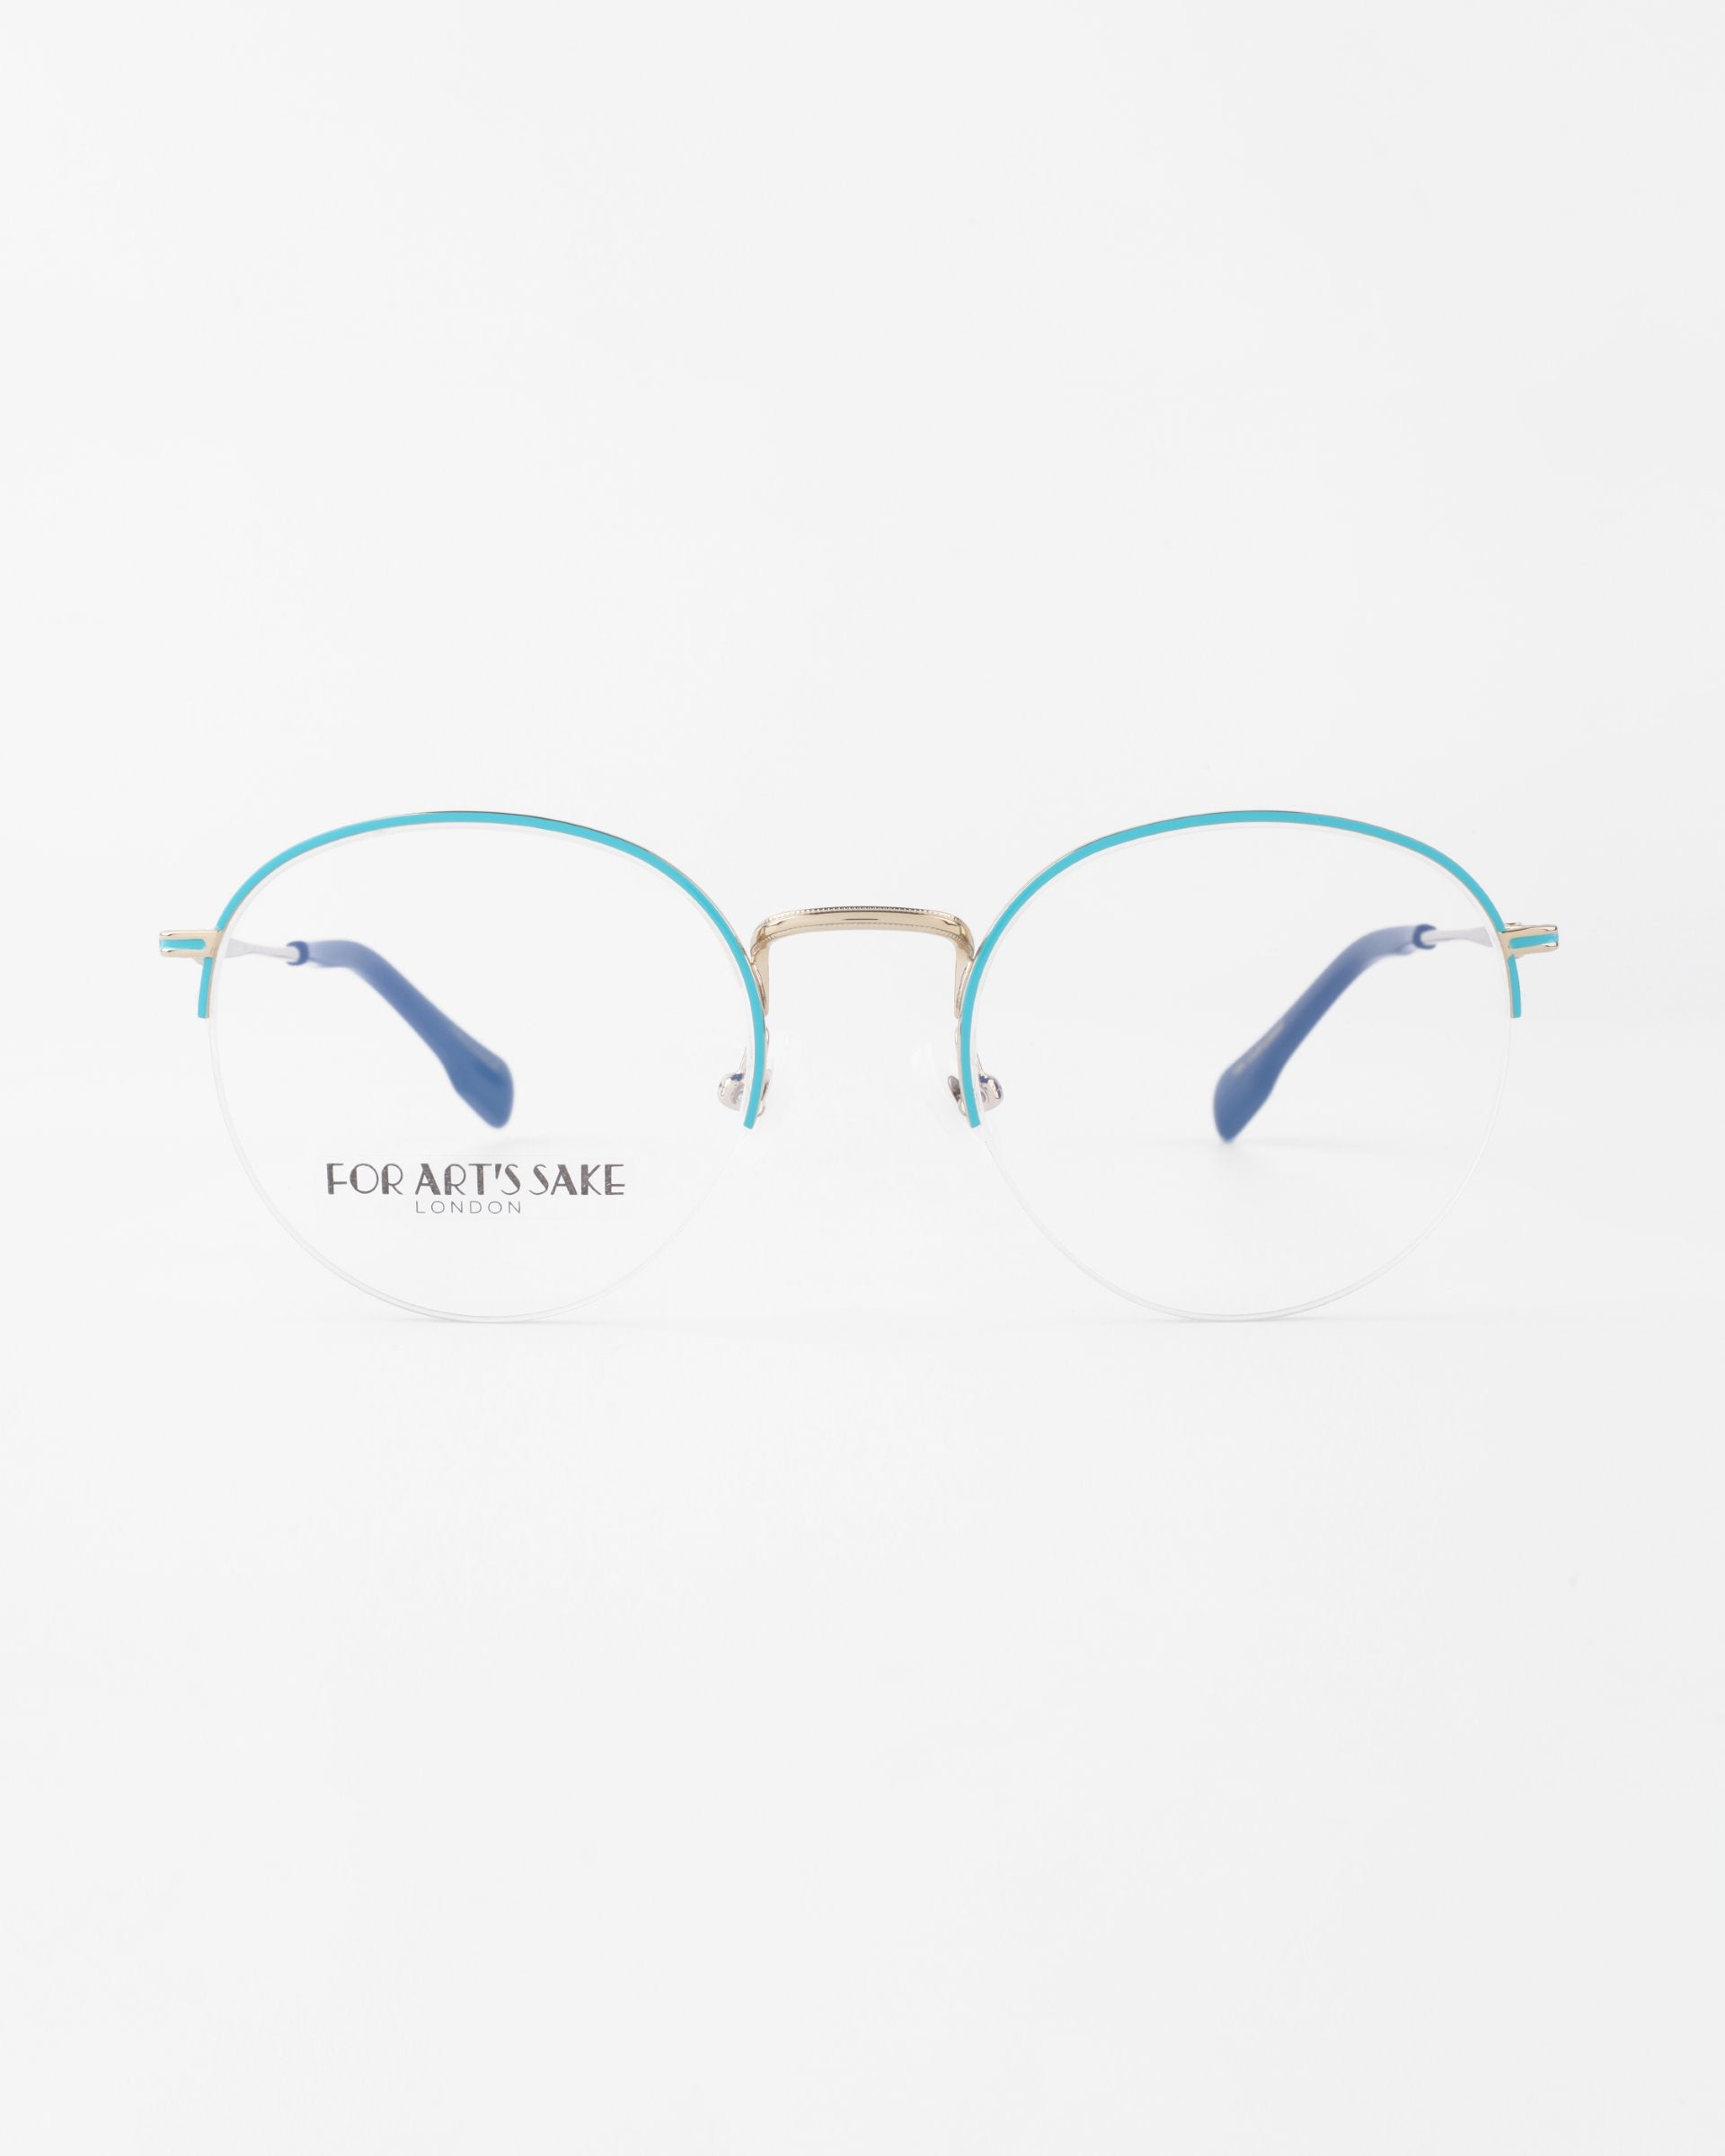 Image of a pair of eyeglasses with a metal frame. The top of the frames is turquoise, and the temples are also turquoise with blue tips. "FOR ART'S SAKE LONDON" is printed on the left lens. These stylish Ivy glasses by For Art's Sake®, designed for both fashion and function, include prescription lenses with a blue light filter. The background is white.